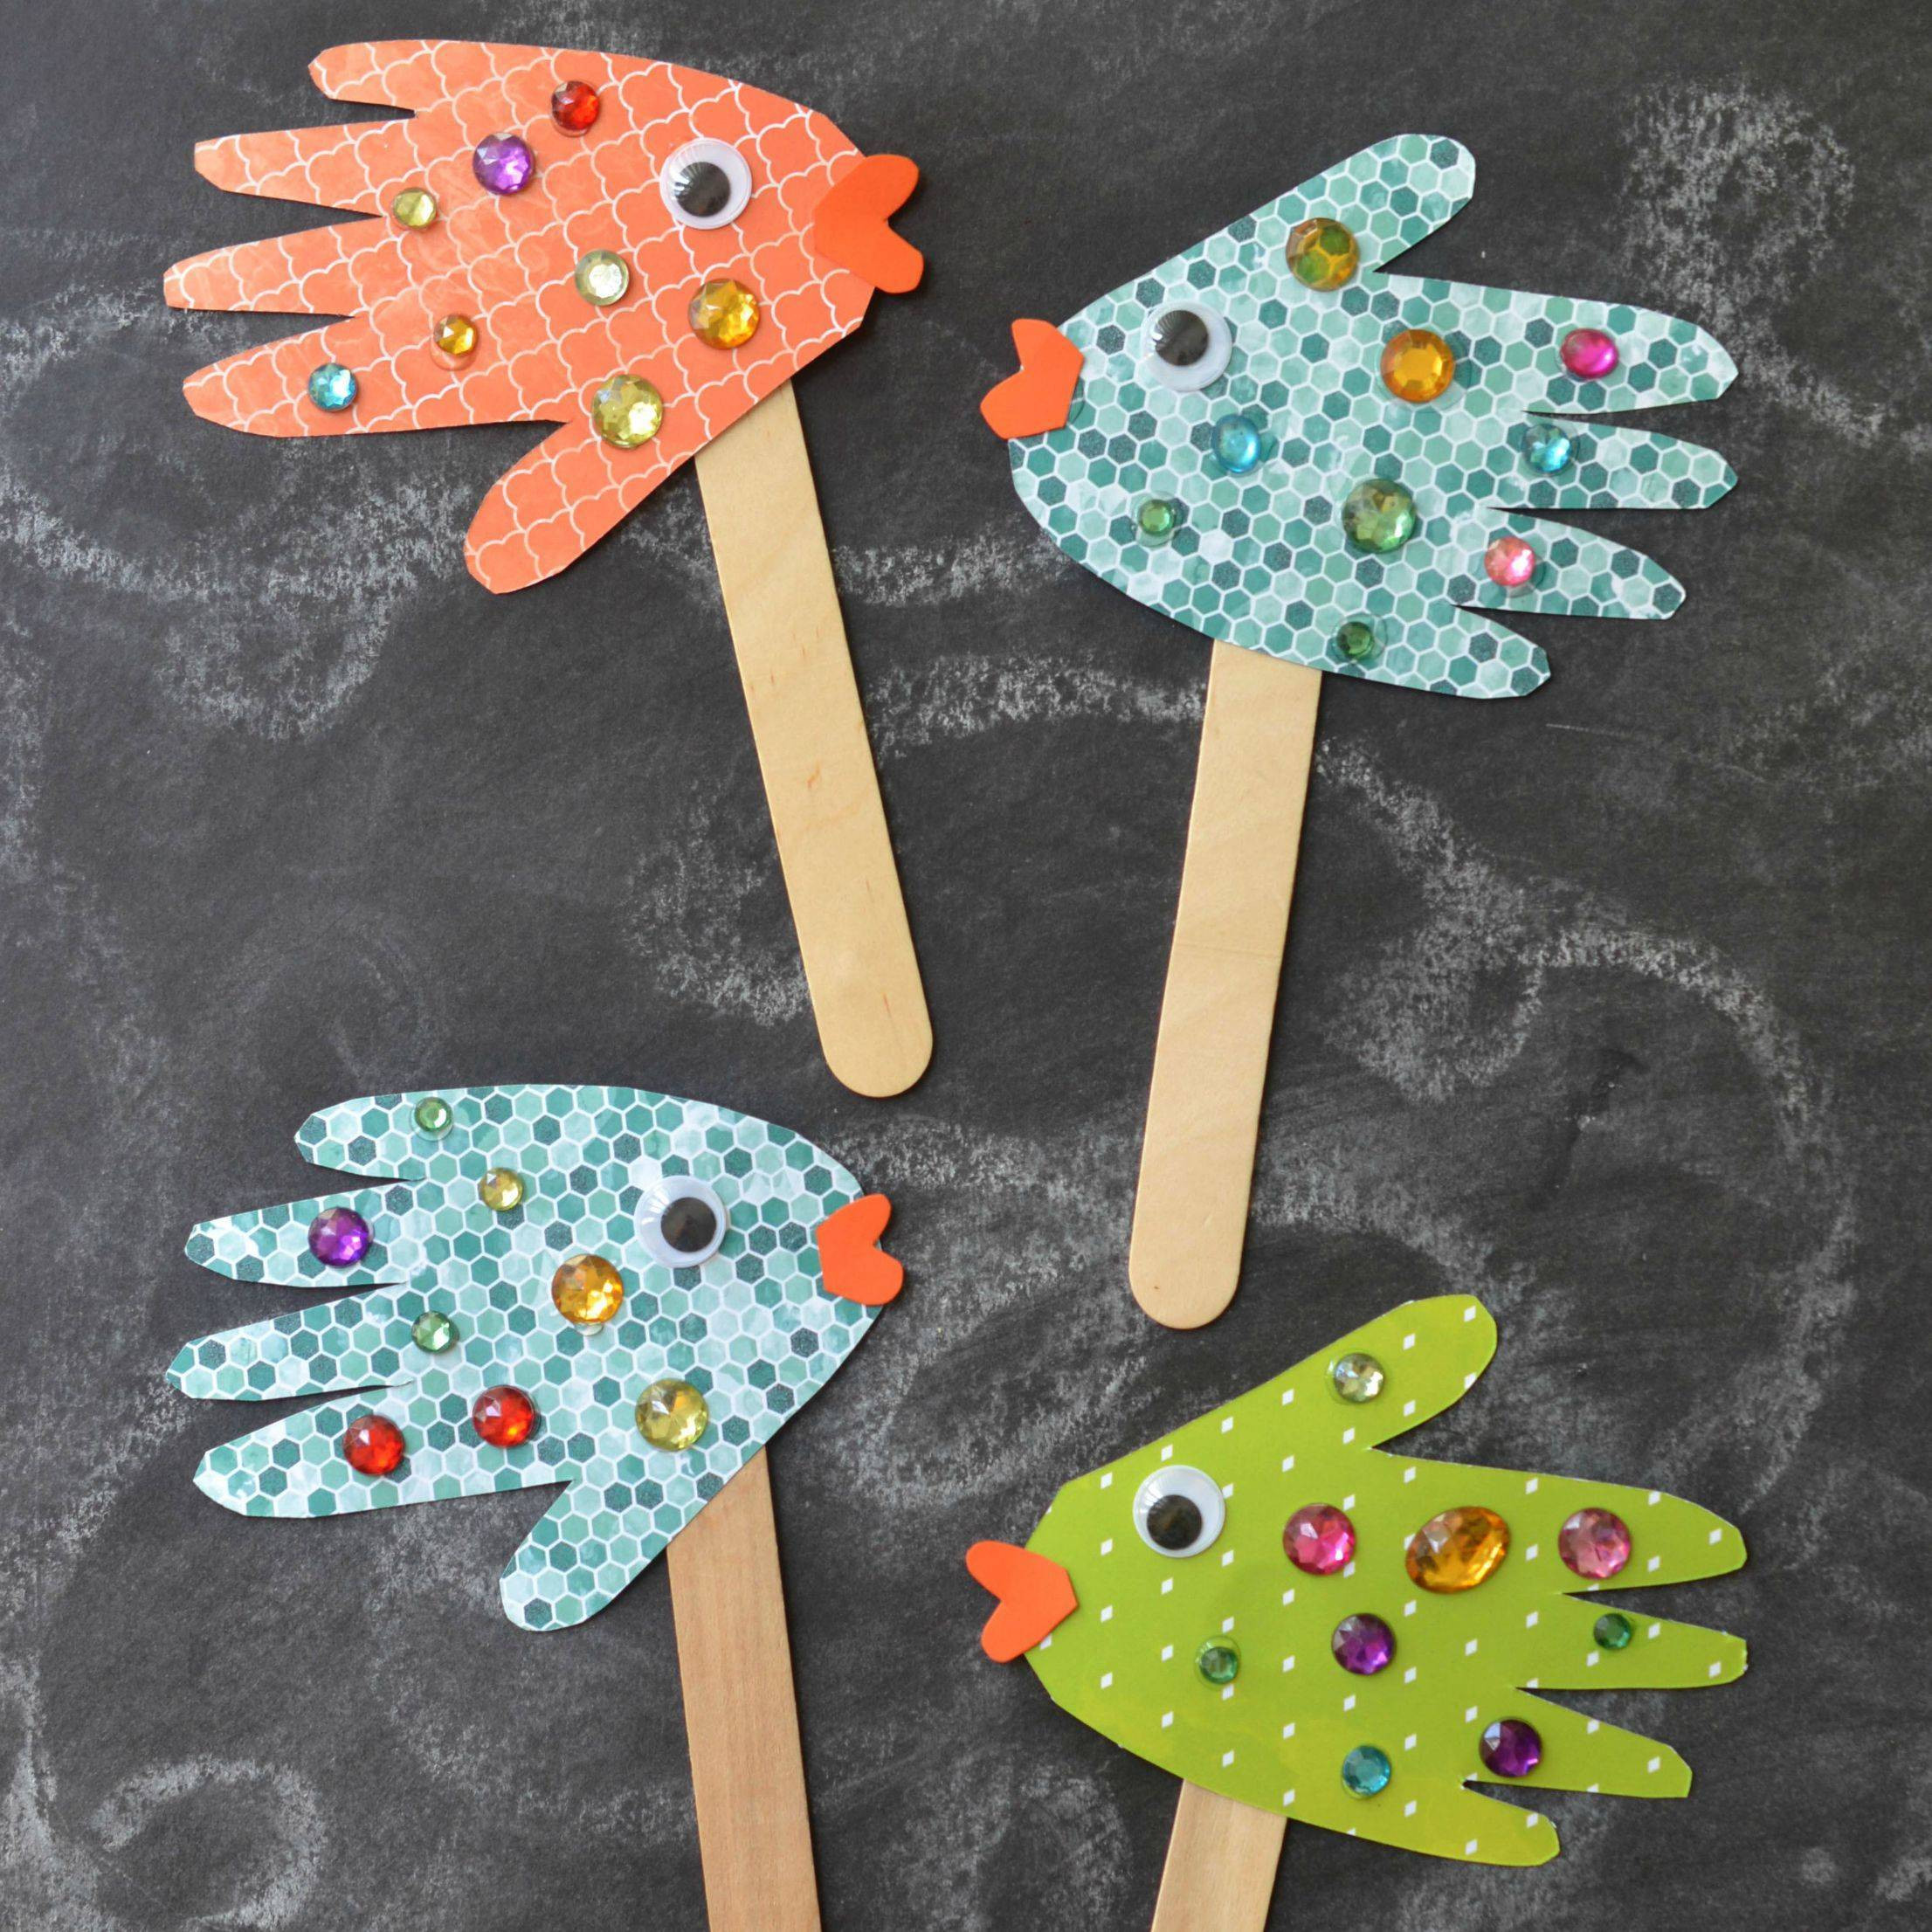 Simple Crafts For Preschoolers
 Handprint Fish Puppets